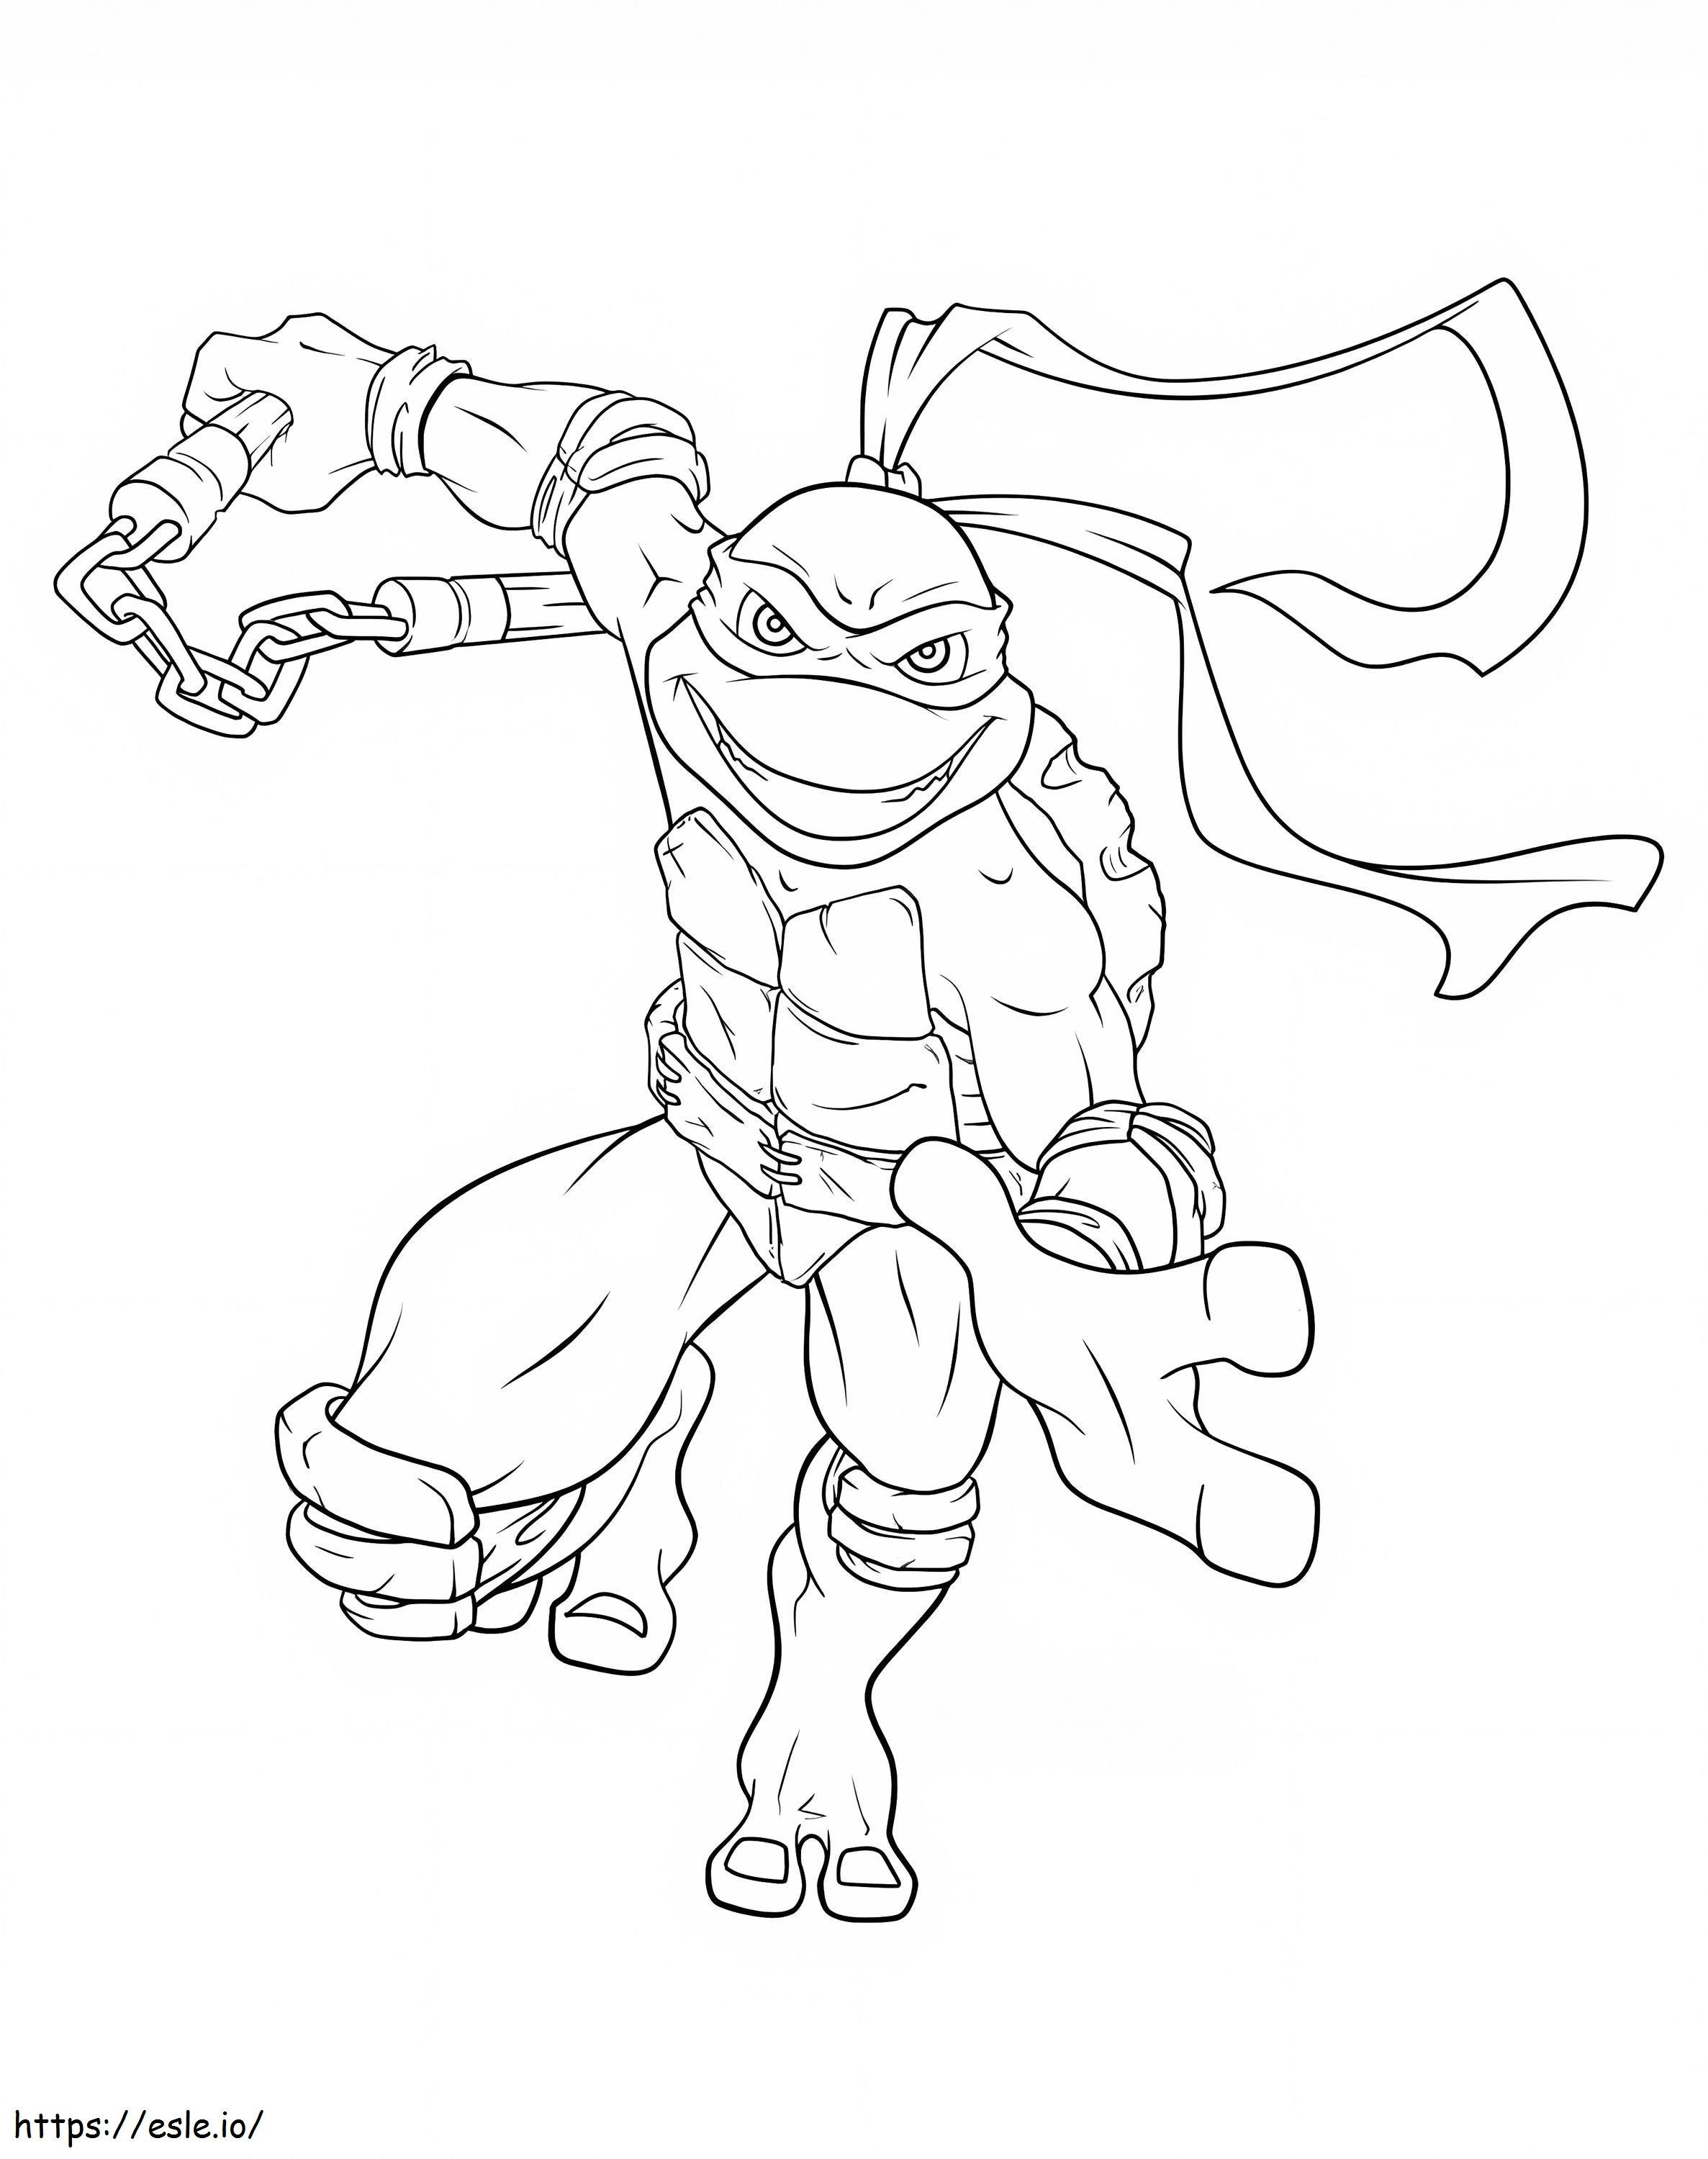 Michelangelo Smiling coloring page